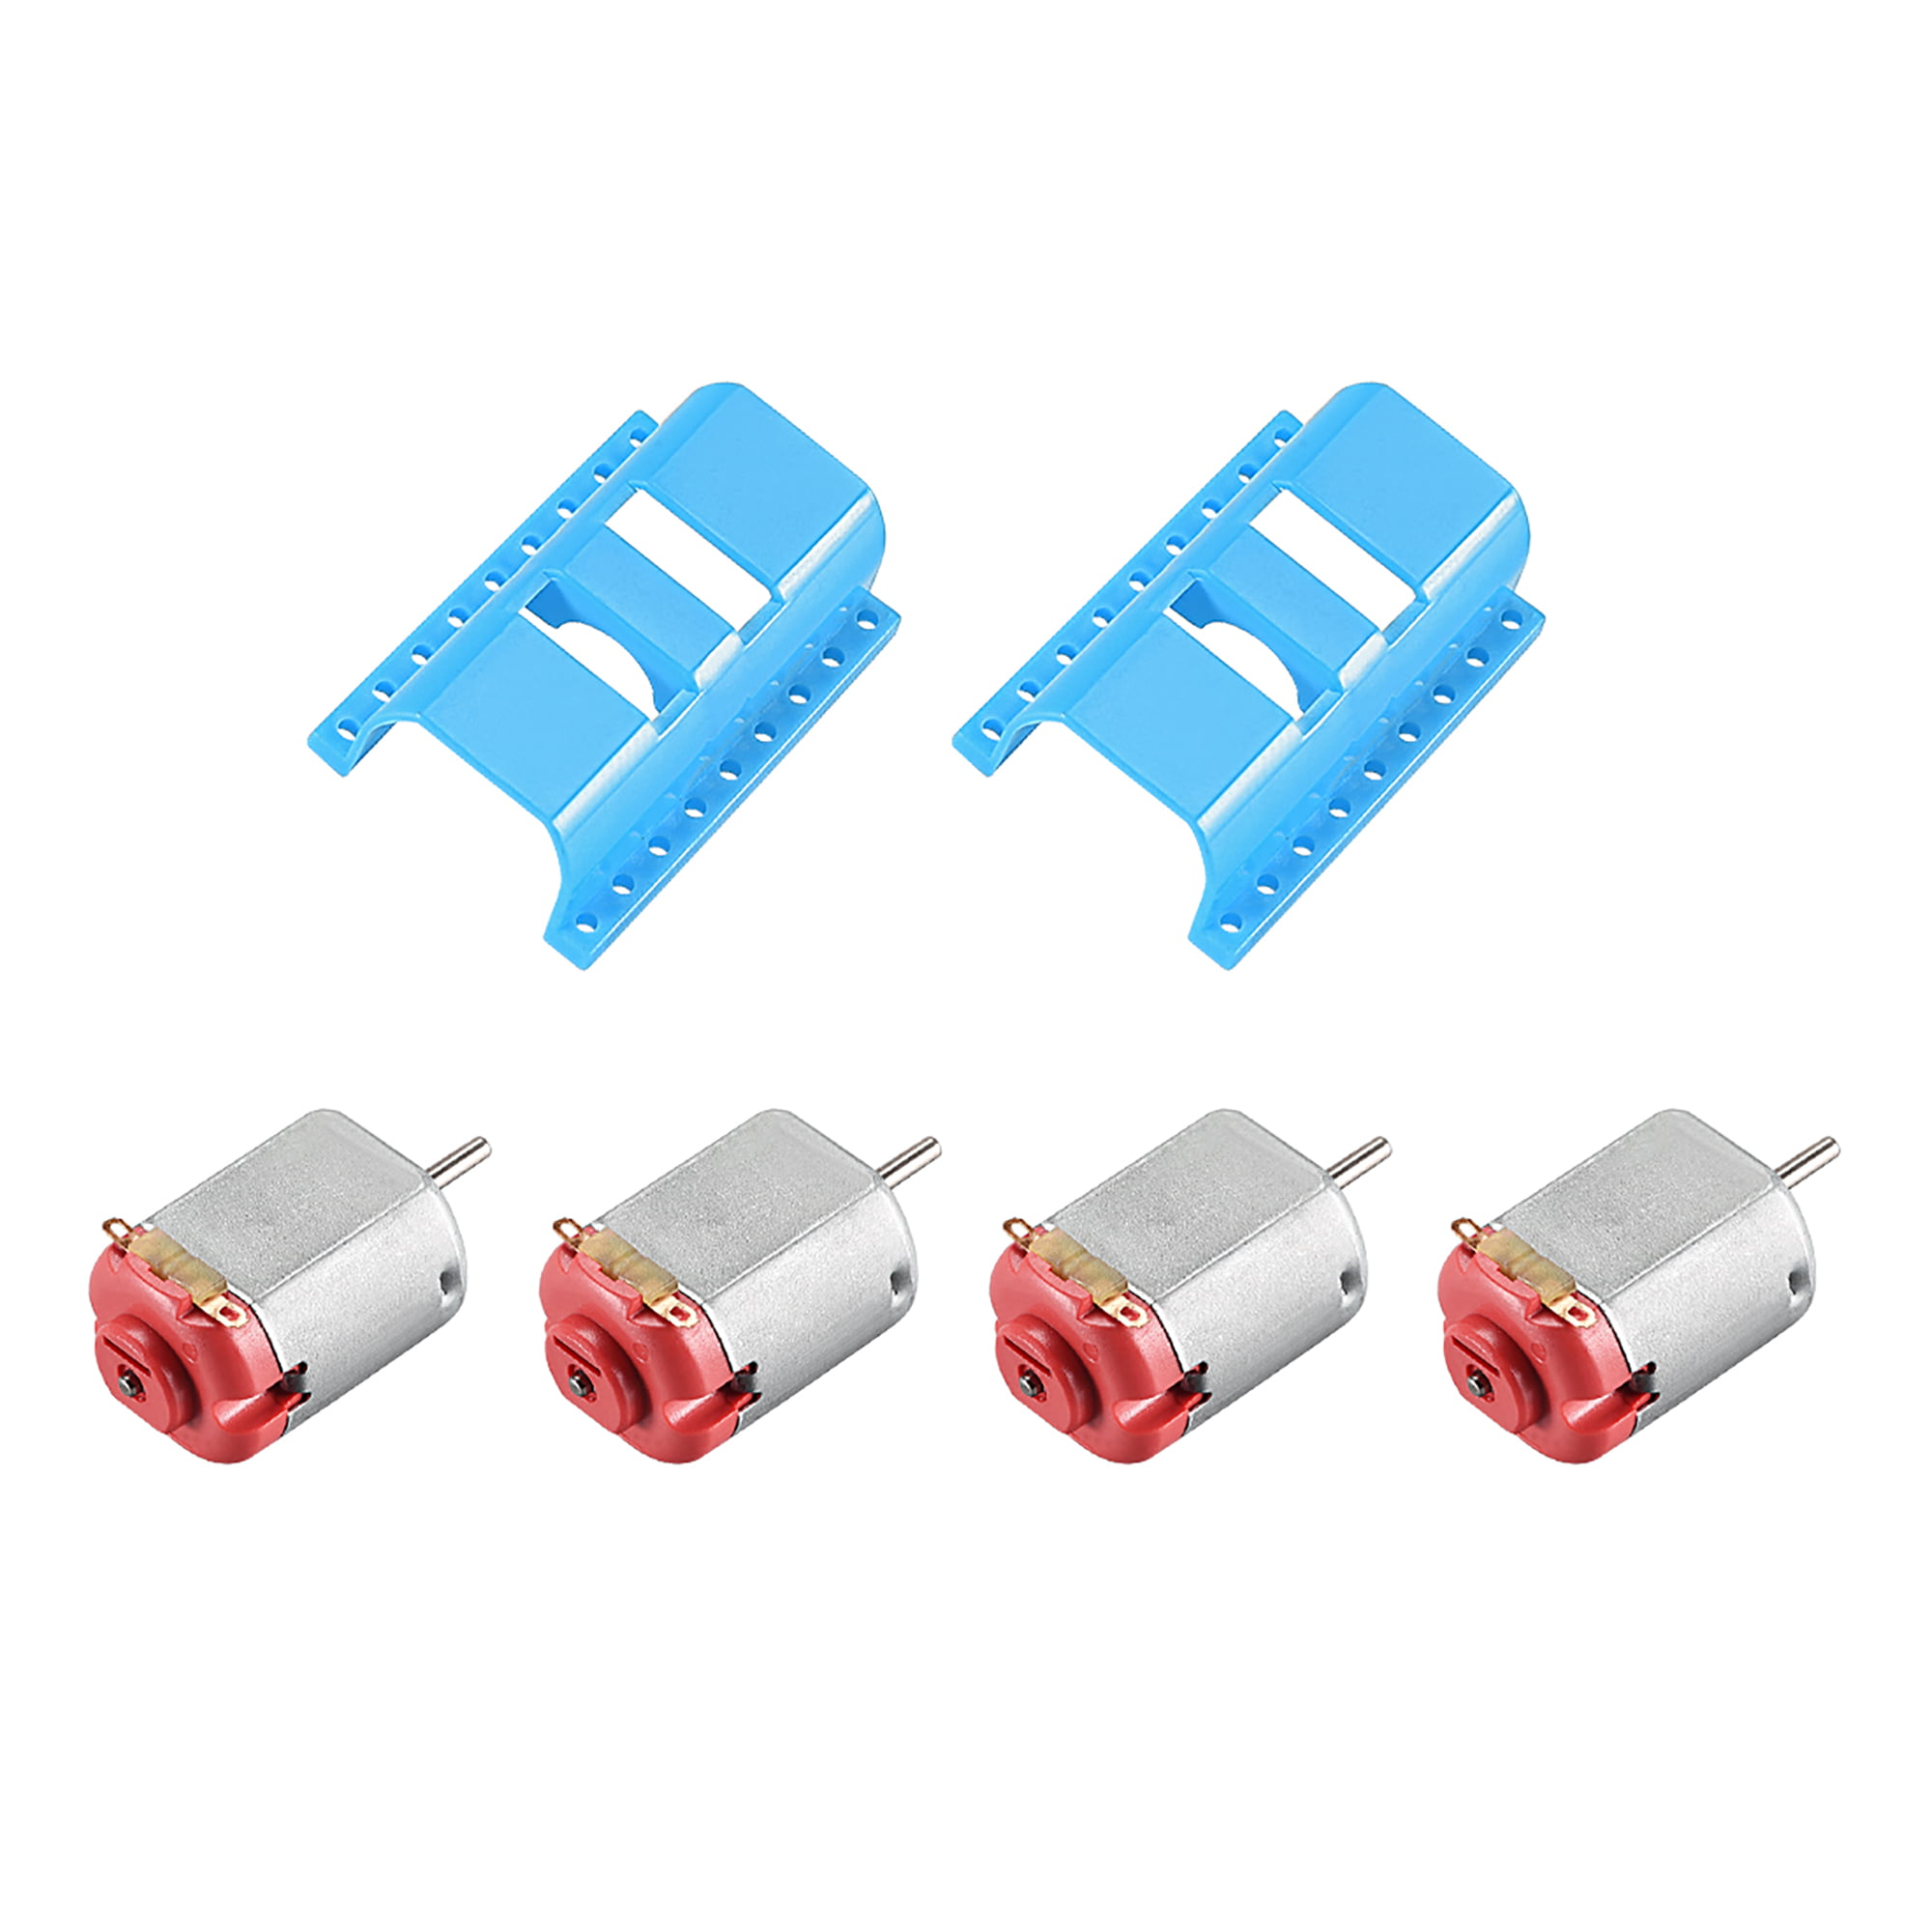 130 motor DC small motor motor diy with 2mm round plastic 9-tooth gear gear  - SINONING- Electronics DIY Accessories Store